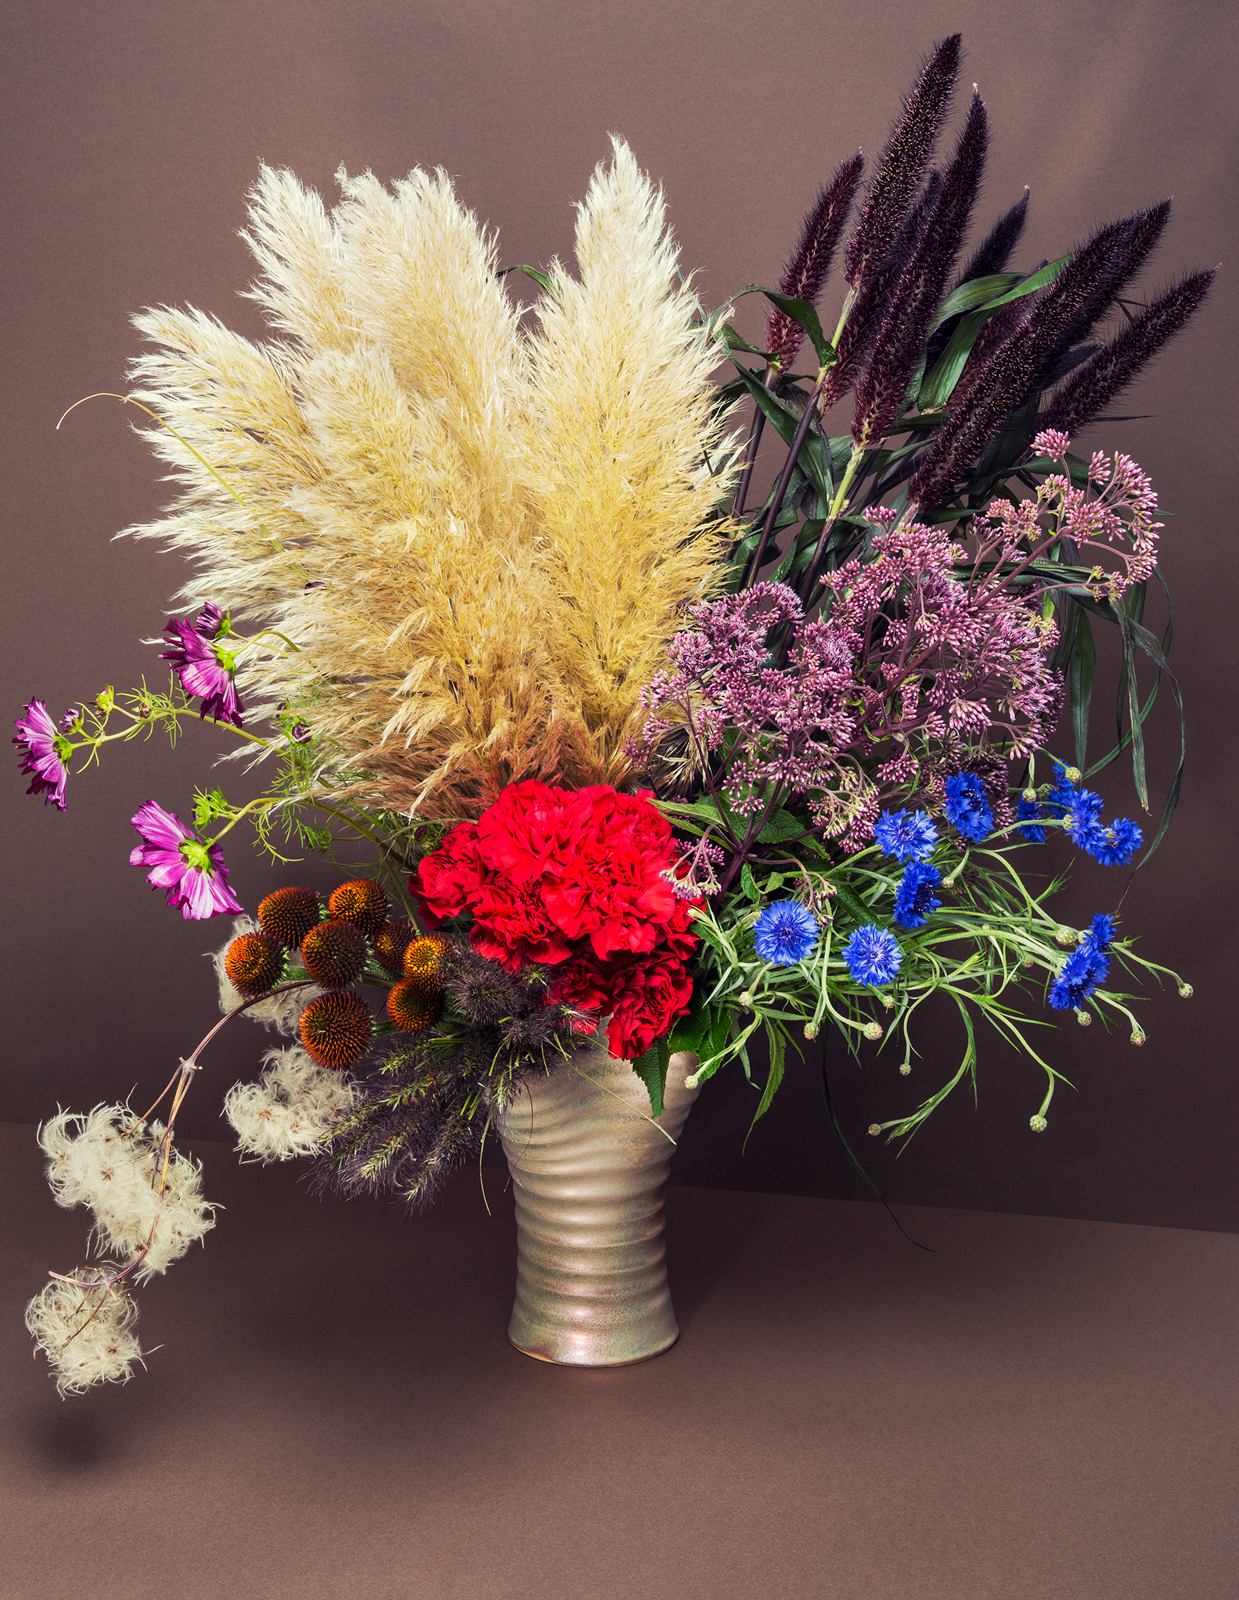  Arrangement by Mark Colle,  for  AnOther Magazine  